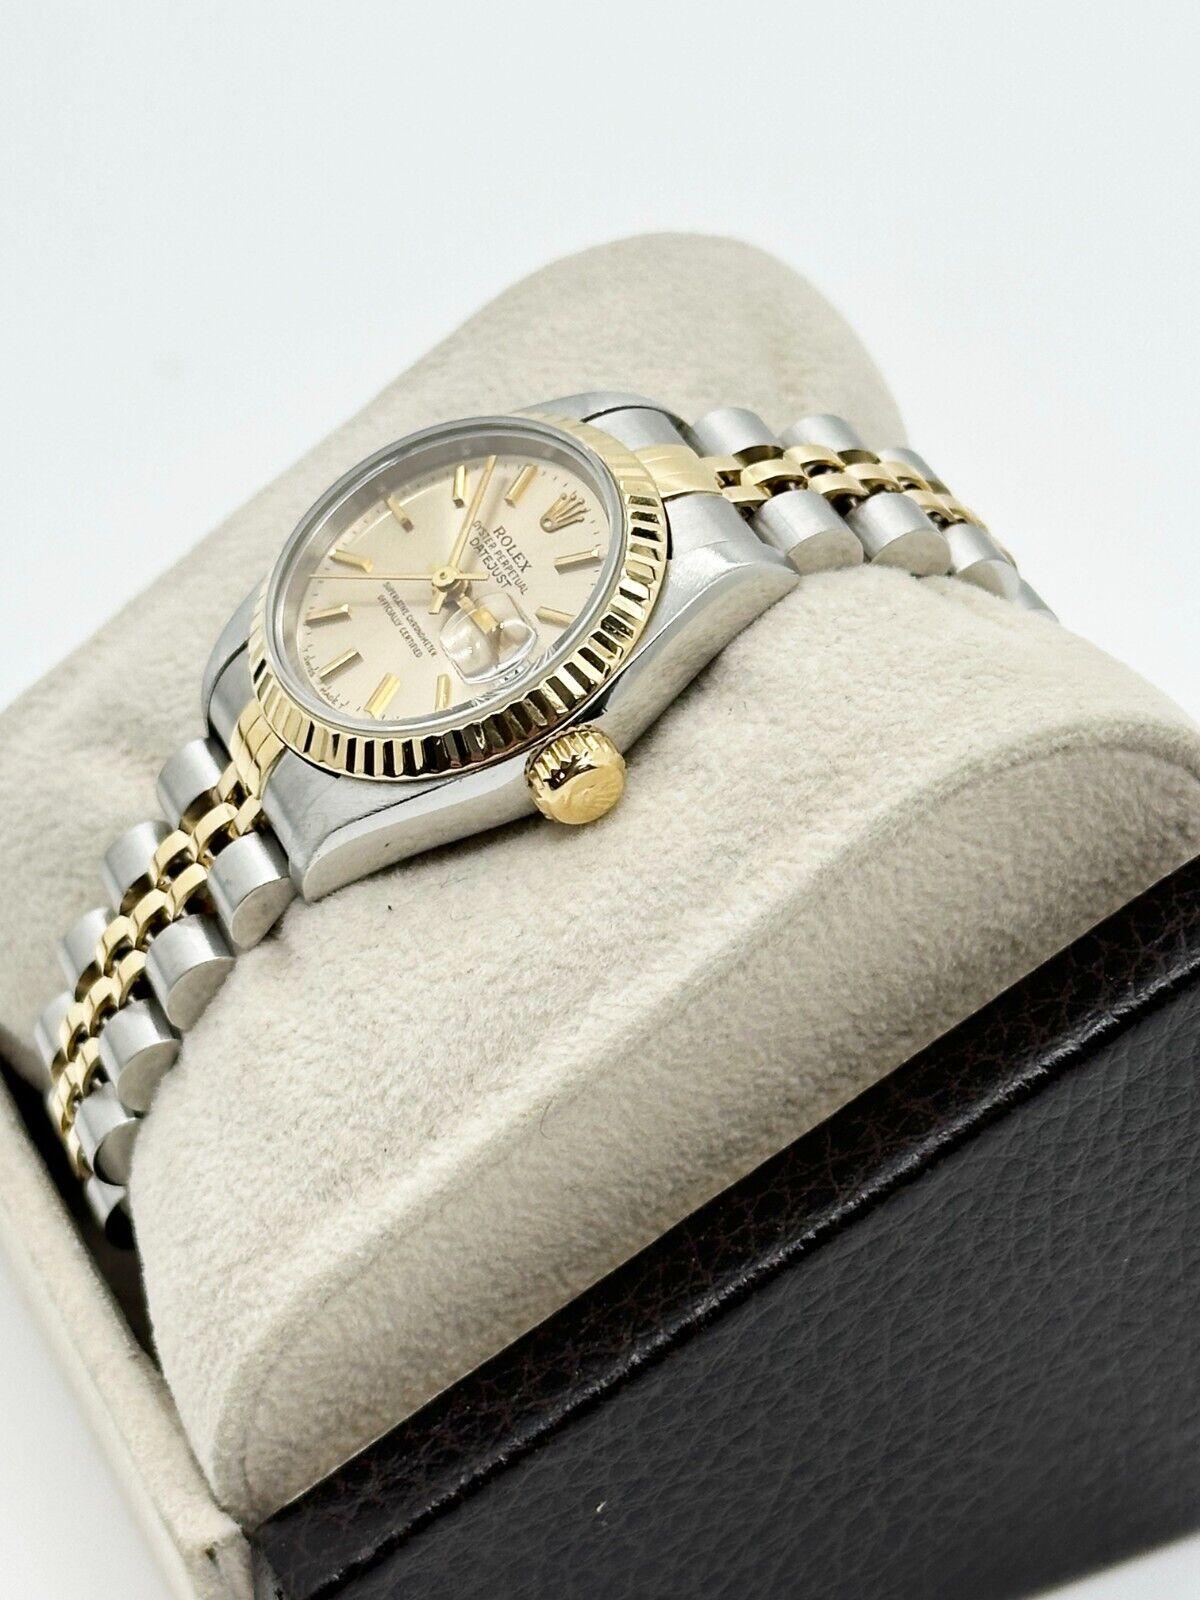 Style Number: 69173



Serial: W121***



Year: 1995

 

Model: Ladies Datejust

 

Case Material: Stainless Steel

 

Band: 18K Yellow Gold & Stainless Steel

 

Bezel: 18K Yellow Gold

 

Dial: Silver

 

Face: Sapphire Crystal

 

Case Size: